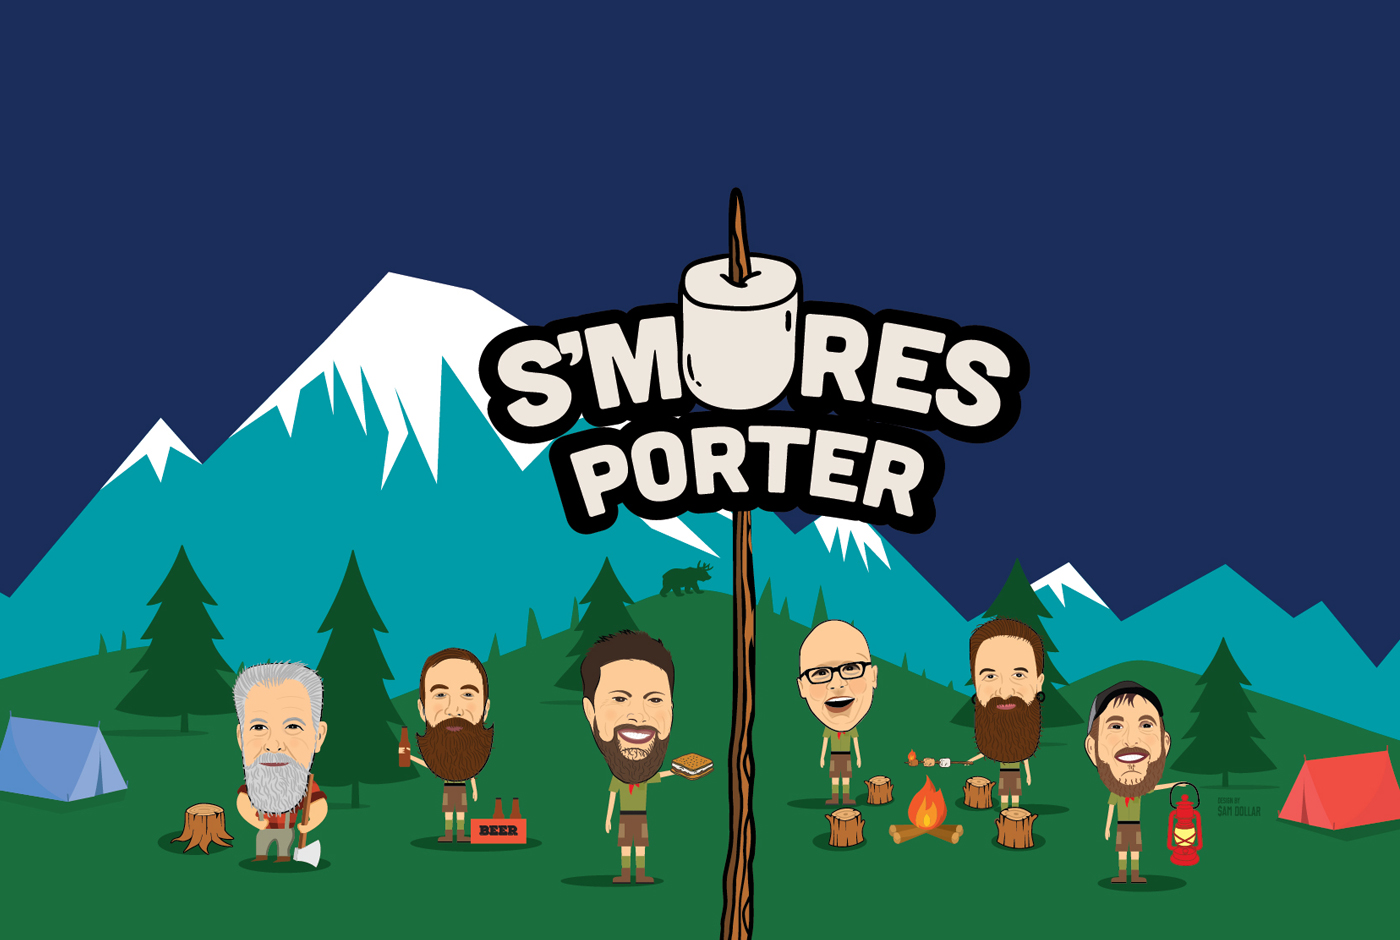 Wingman-Brewers-Peaks-and-Pints-Smores-Porter-calendar